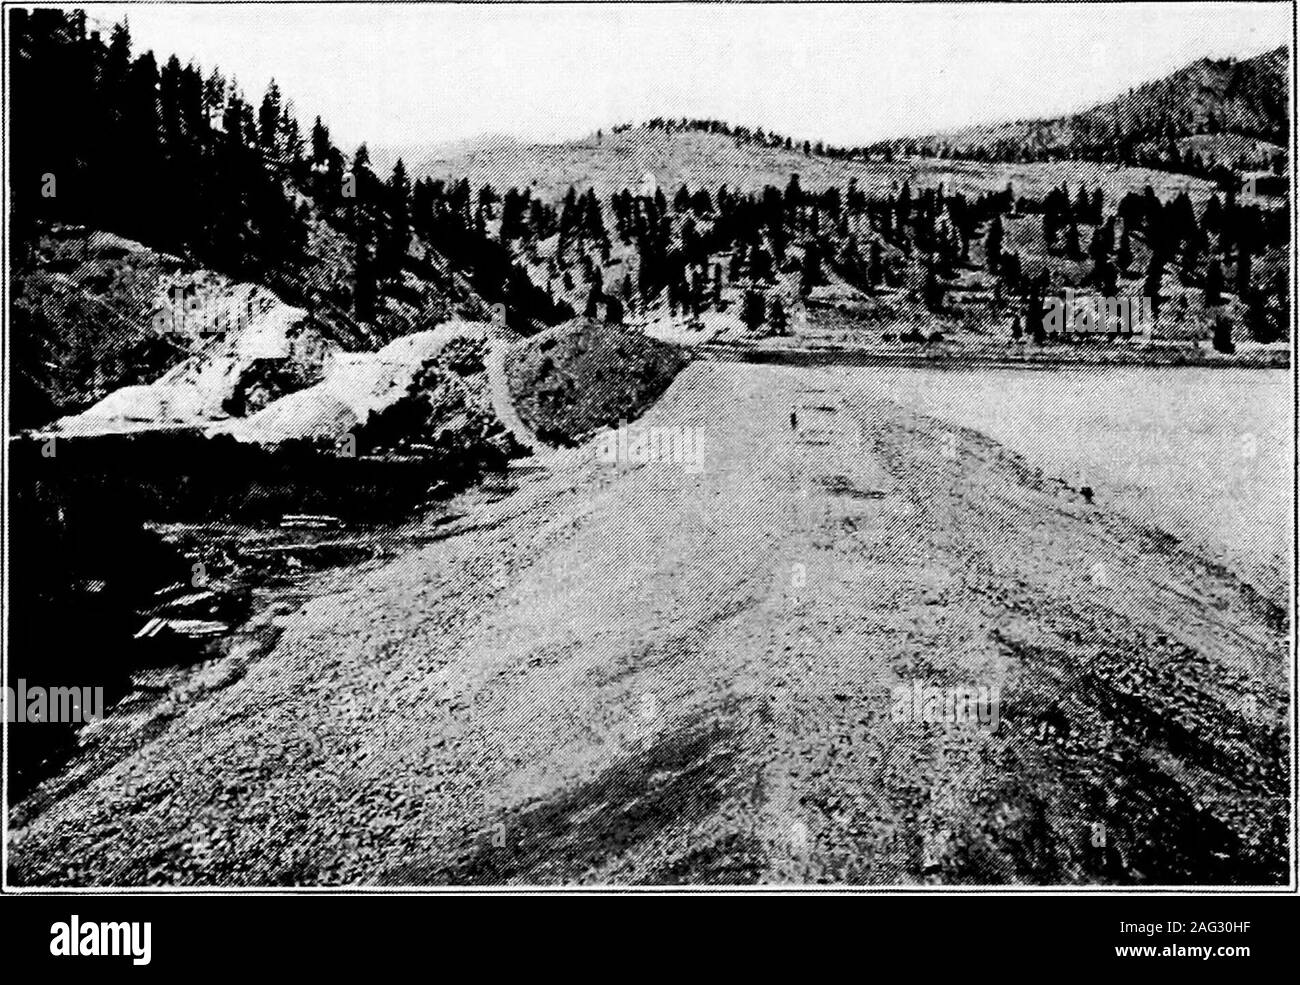 . Principles of irrigation engineering, arid lands, water supply, storage works, dams, canals, water rights and products. Fig. C-—Hydraulic construction of earth dam, giant in foreground washingearth and small rocks into flumes supported on trestles and conveying materialsto site of dam. Okanogan Project, Wash.. Fig. D.—Completed dam built by hydraulic process, shown above. EARTH DAMS 215 kept wetted by hose or other means to a degree sufficient to give themost dense mass possible when compacted. Where large quantities of material are to be handled and especiallywhere the borrow pits are locat Stock Photo